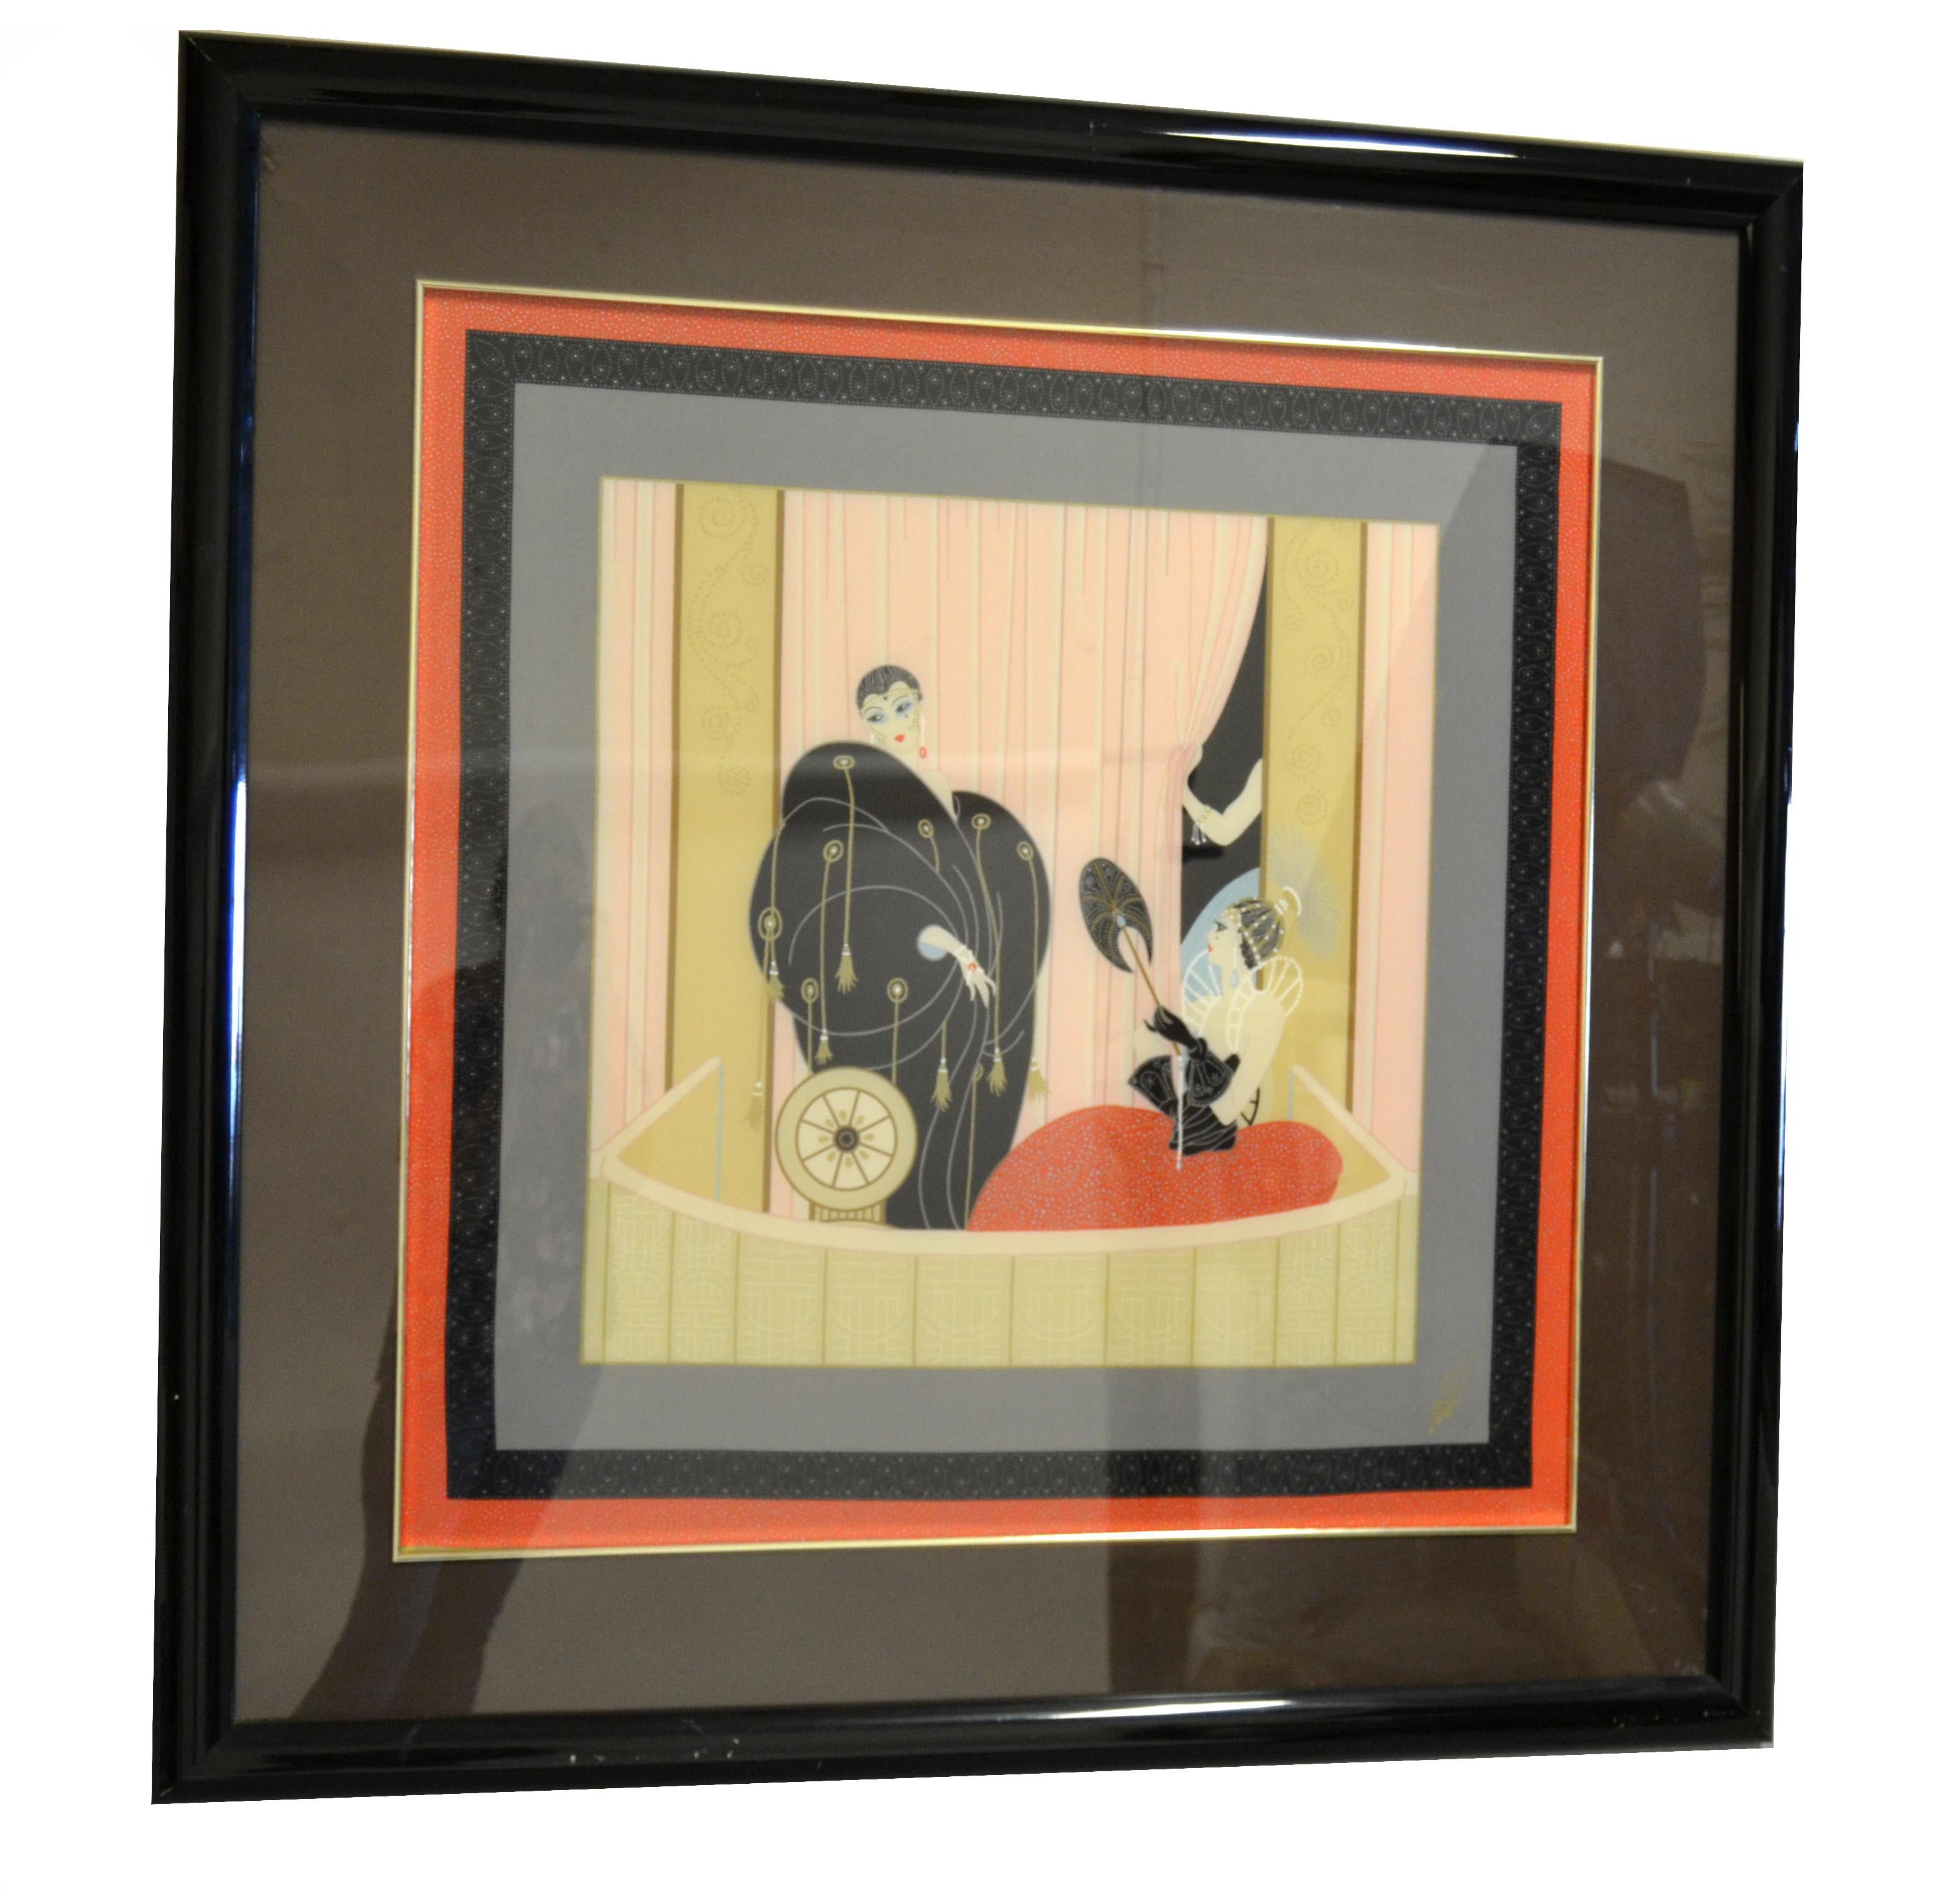 Art Deco framed silk sarf by Erté, titled LOGE de THEATRE made in the 1987 in France.
Black Gloss Wood Frame.
Signed on the Silk Scarf.
Silk Scarf Size measures: 31.75 x 32 inches.
Romain de Tirtoff was a Russian-born French artist and designer